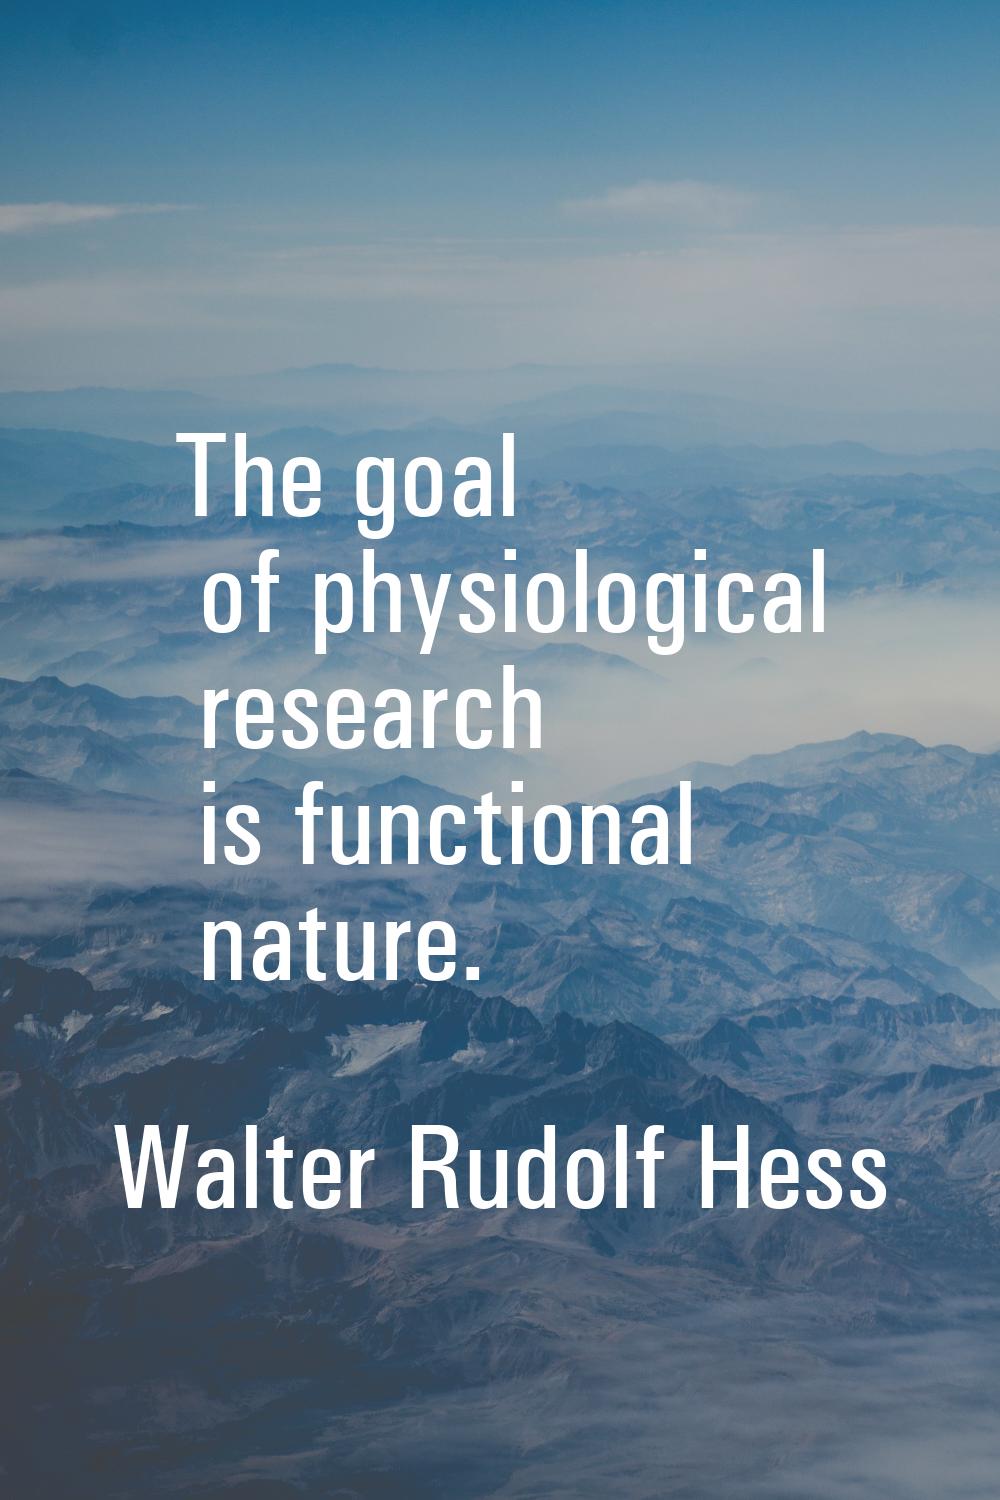 The goal of physiological research is functional nature.